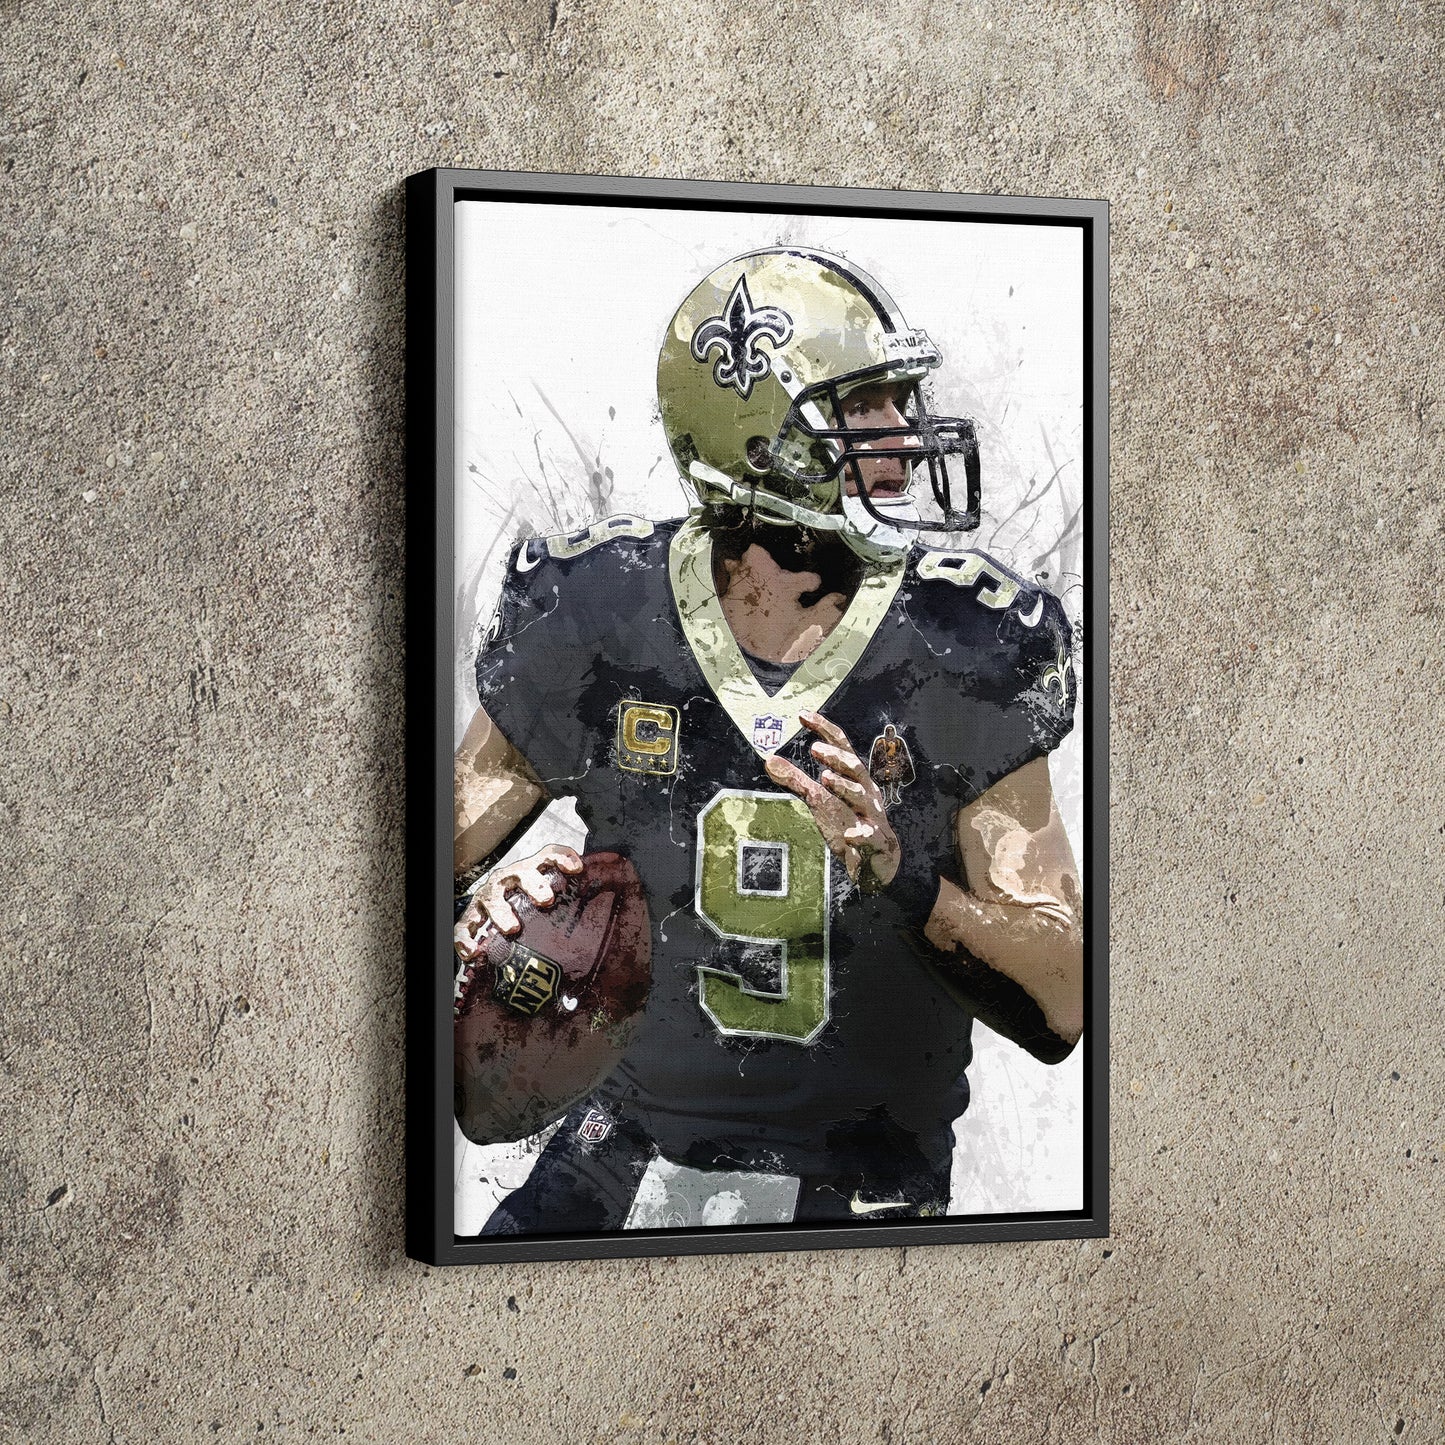 Drew Brees Poster New Orleans Saints Football Painting Hand Made Posters Canvas Print Wall Art Man Cave Gift Home Kids Decor